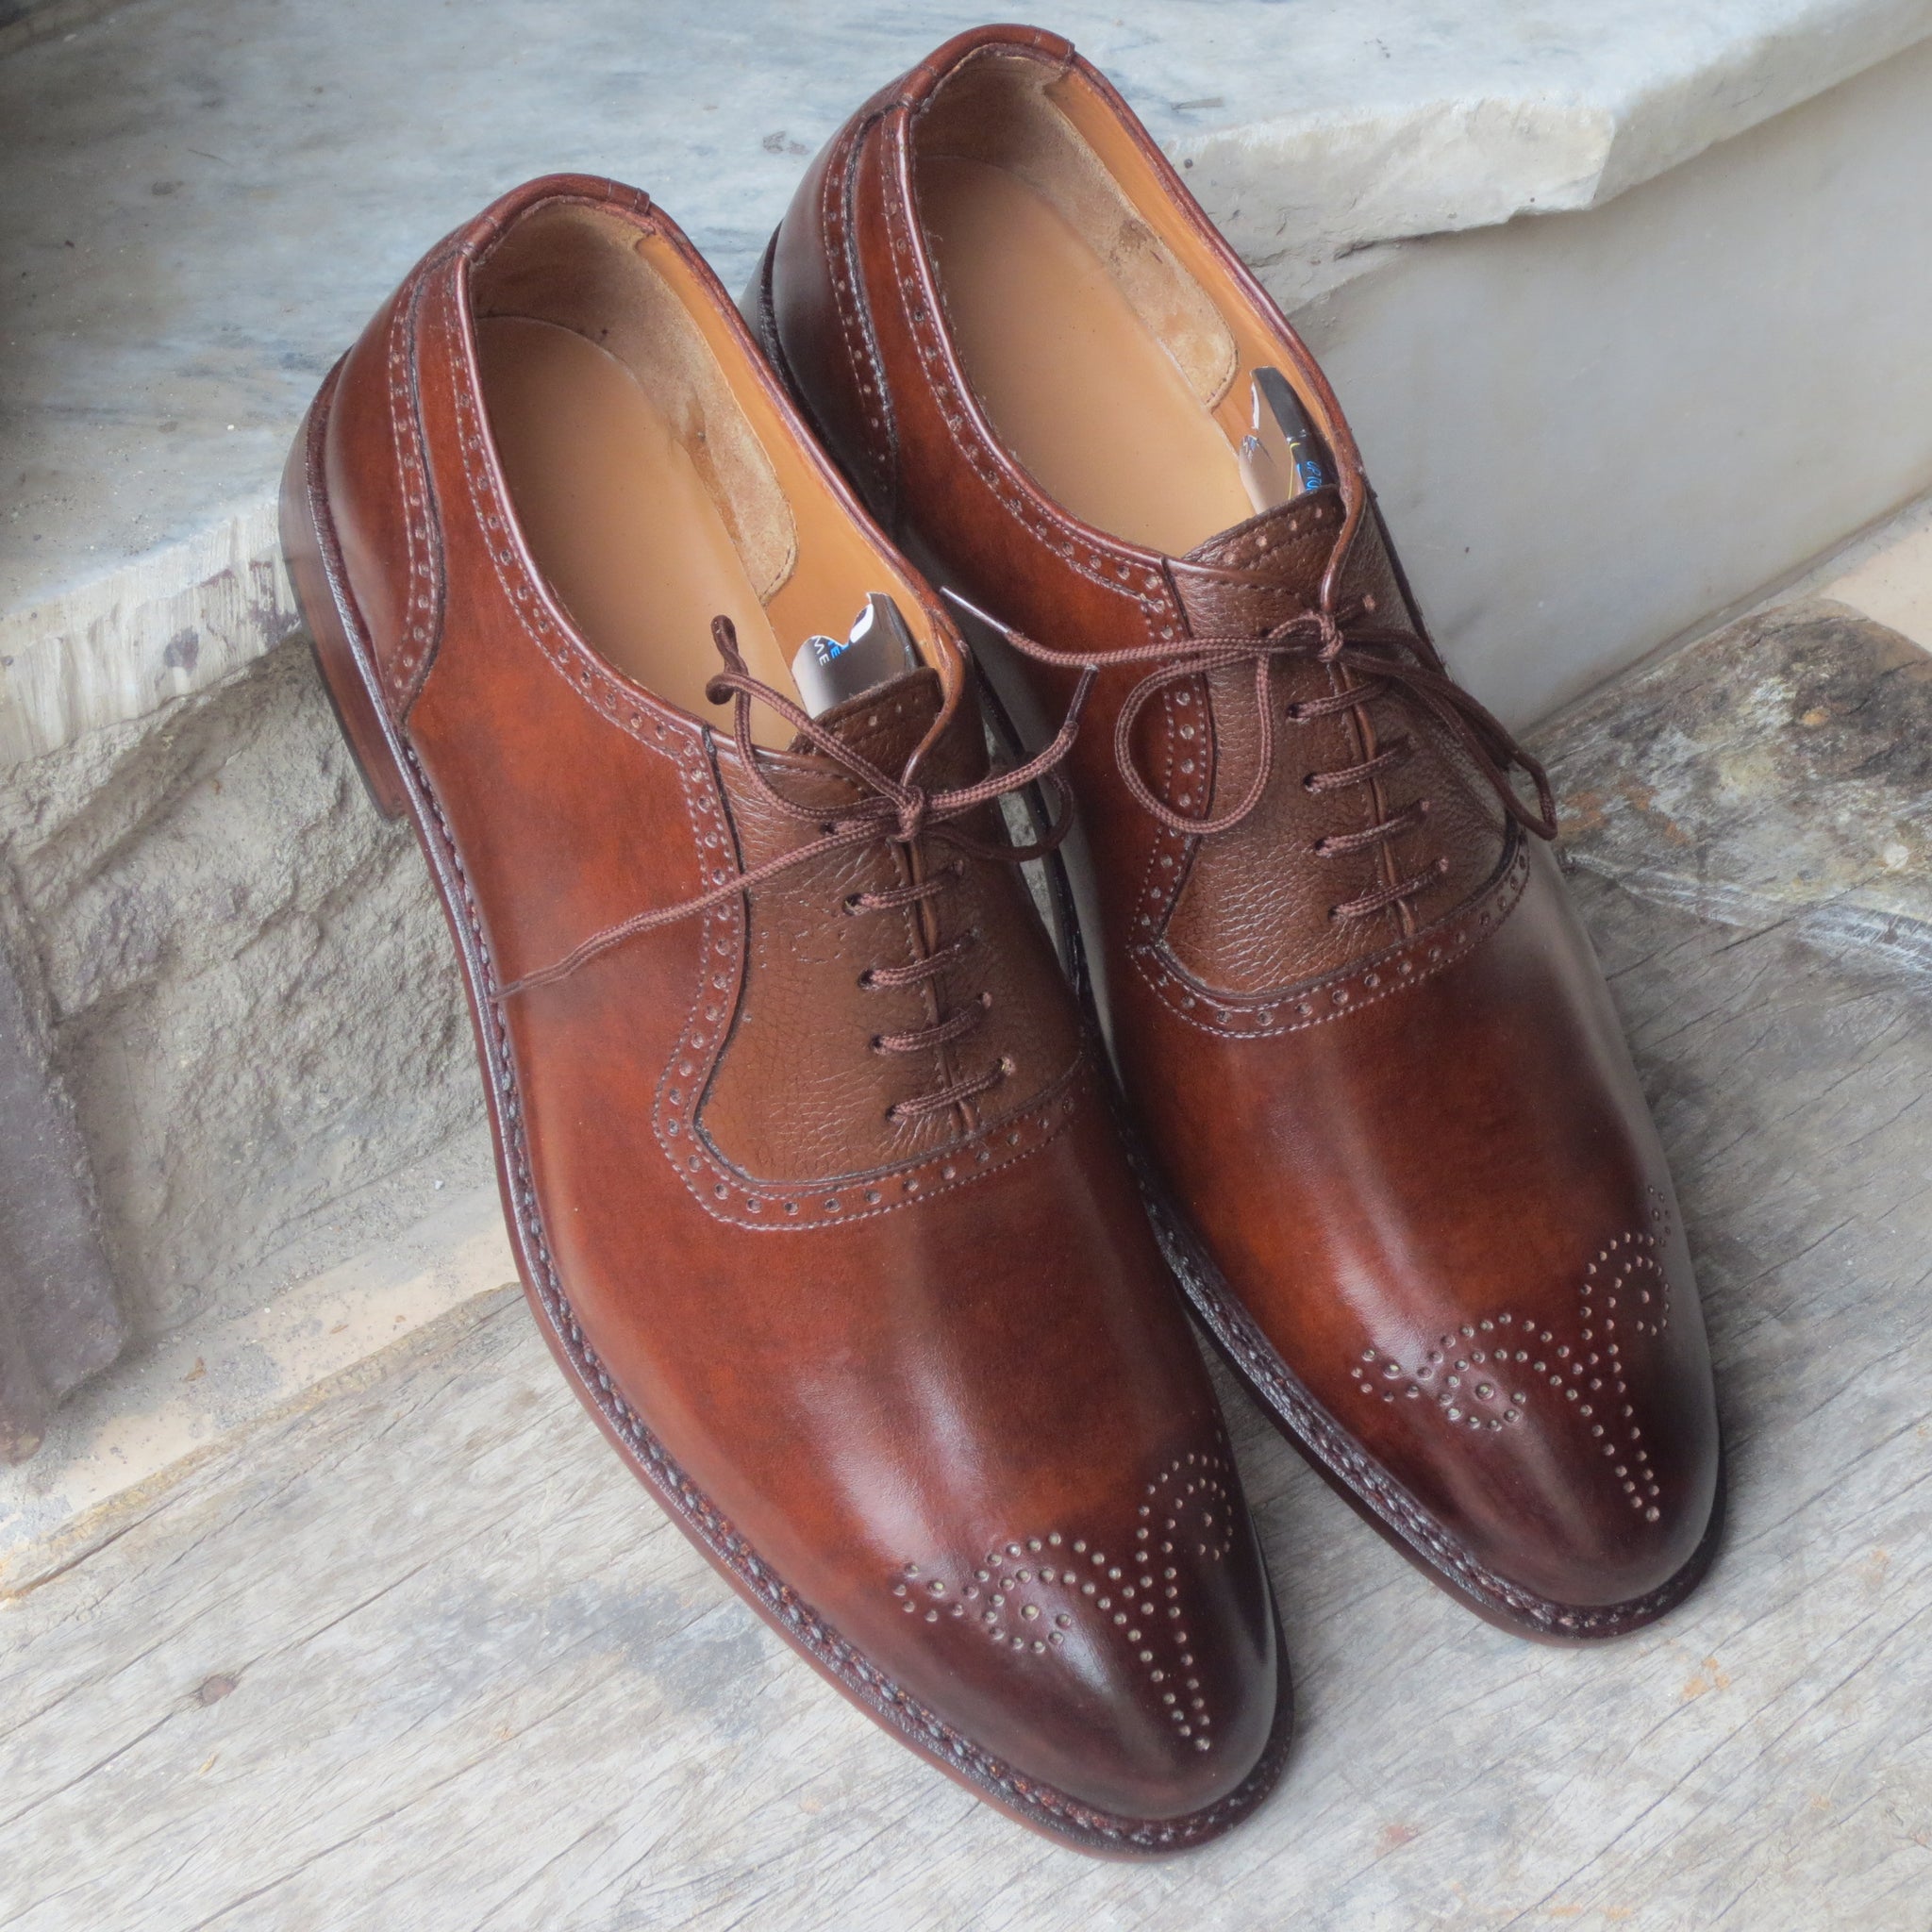 Handmade Brown Brogue Lace Up Pebbled Leather Shoes, Men Dress Formal Shoes - theleathersouq